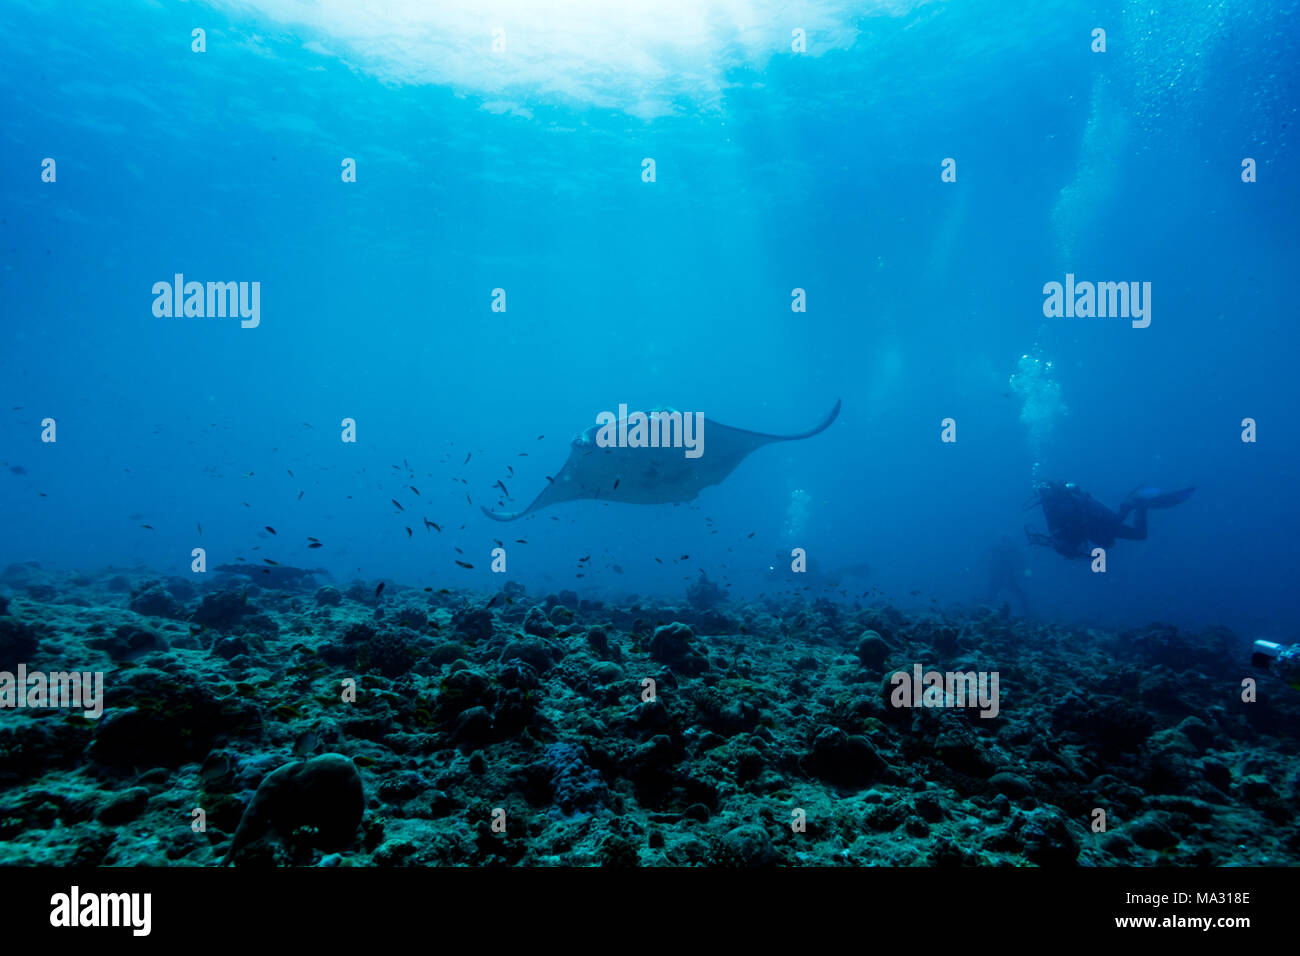 Giant manta ray, Manta birostris, swims over coral reef as divers and photographer watch Stock Photo